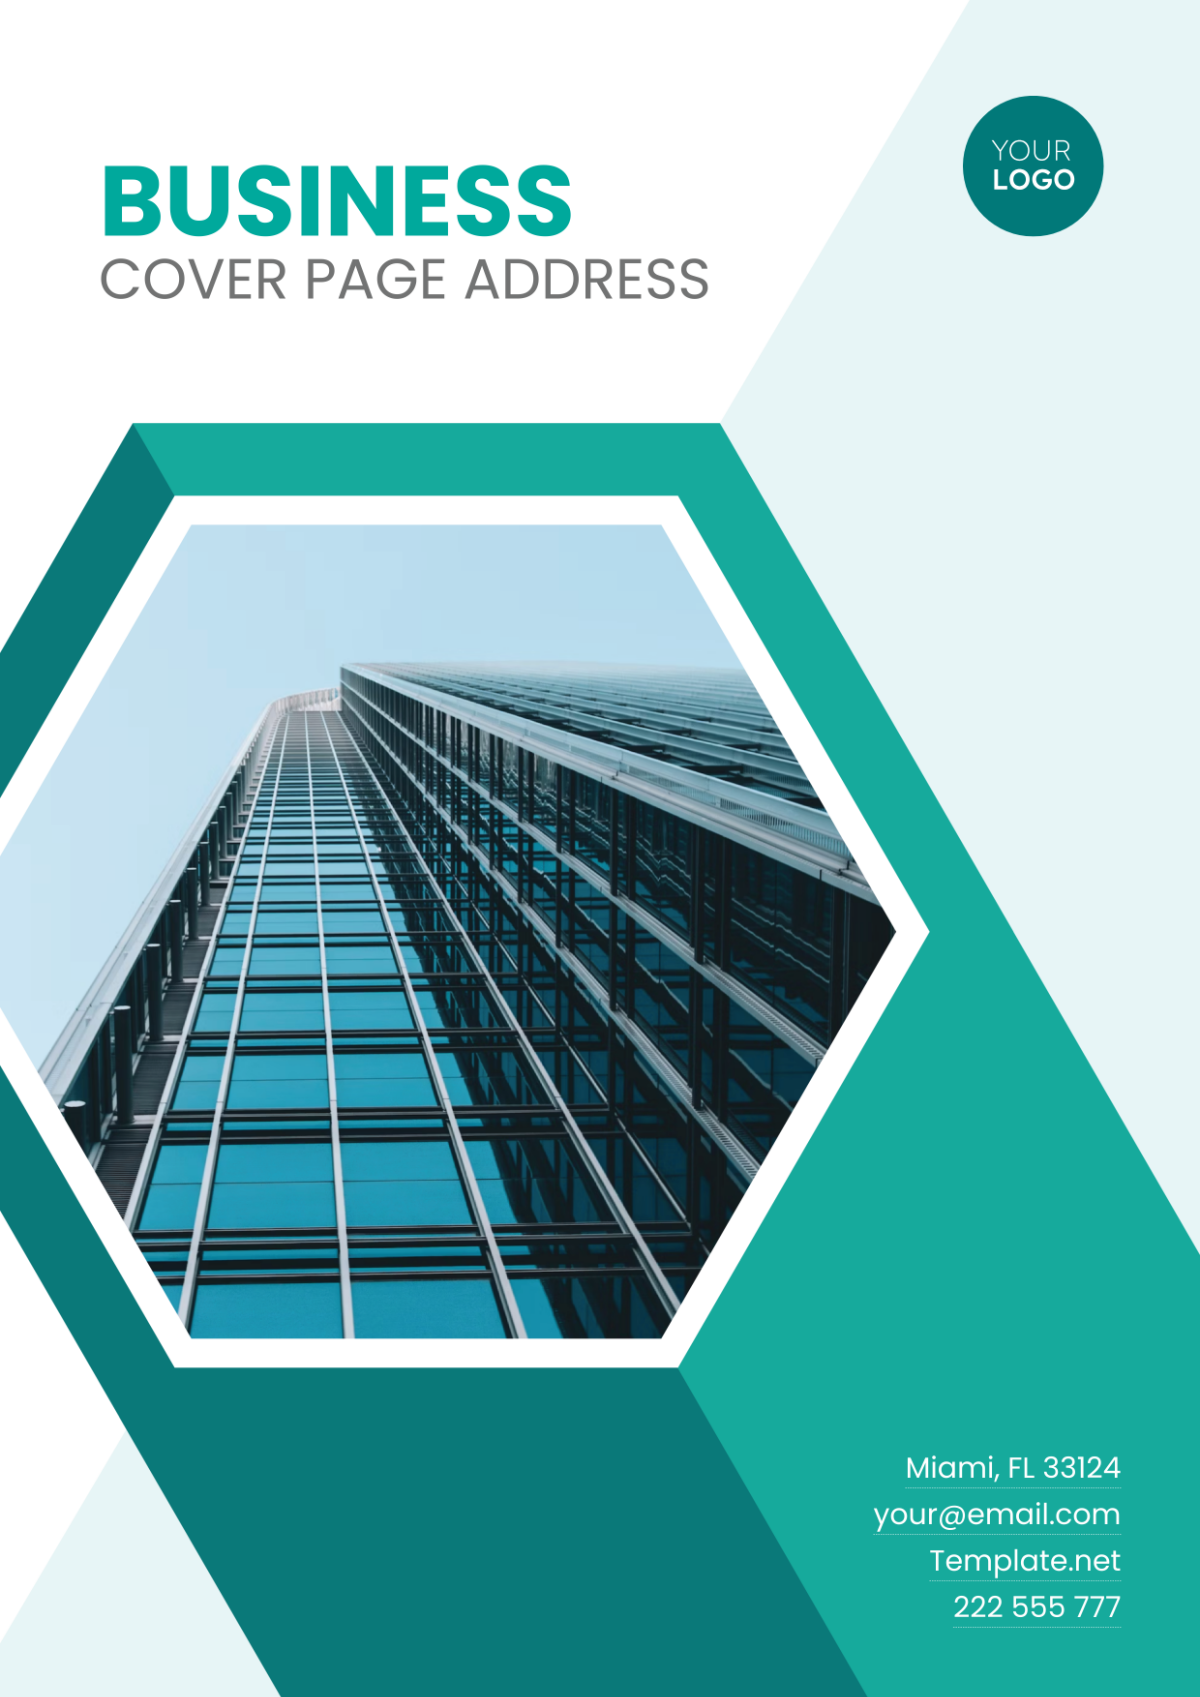 Free Business Cover Page Address Template